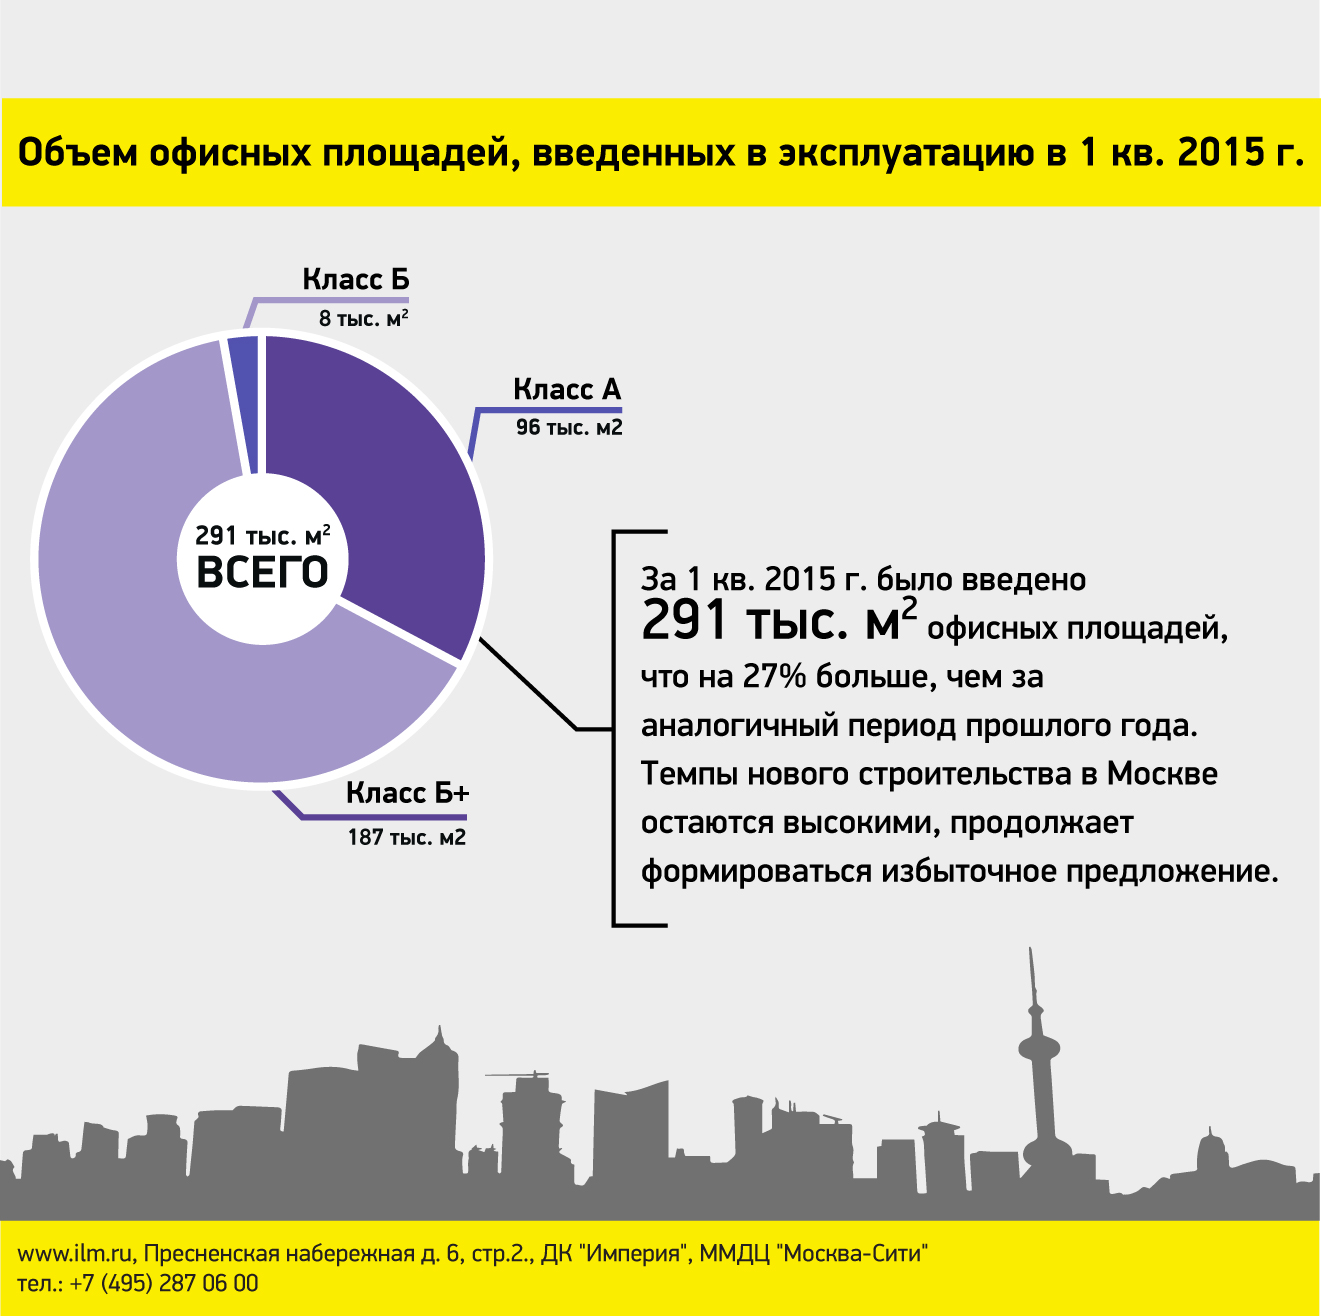 Number of square meters delivered in Q1 2015